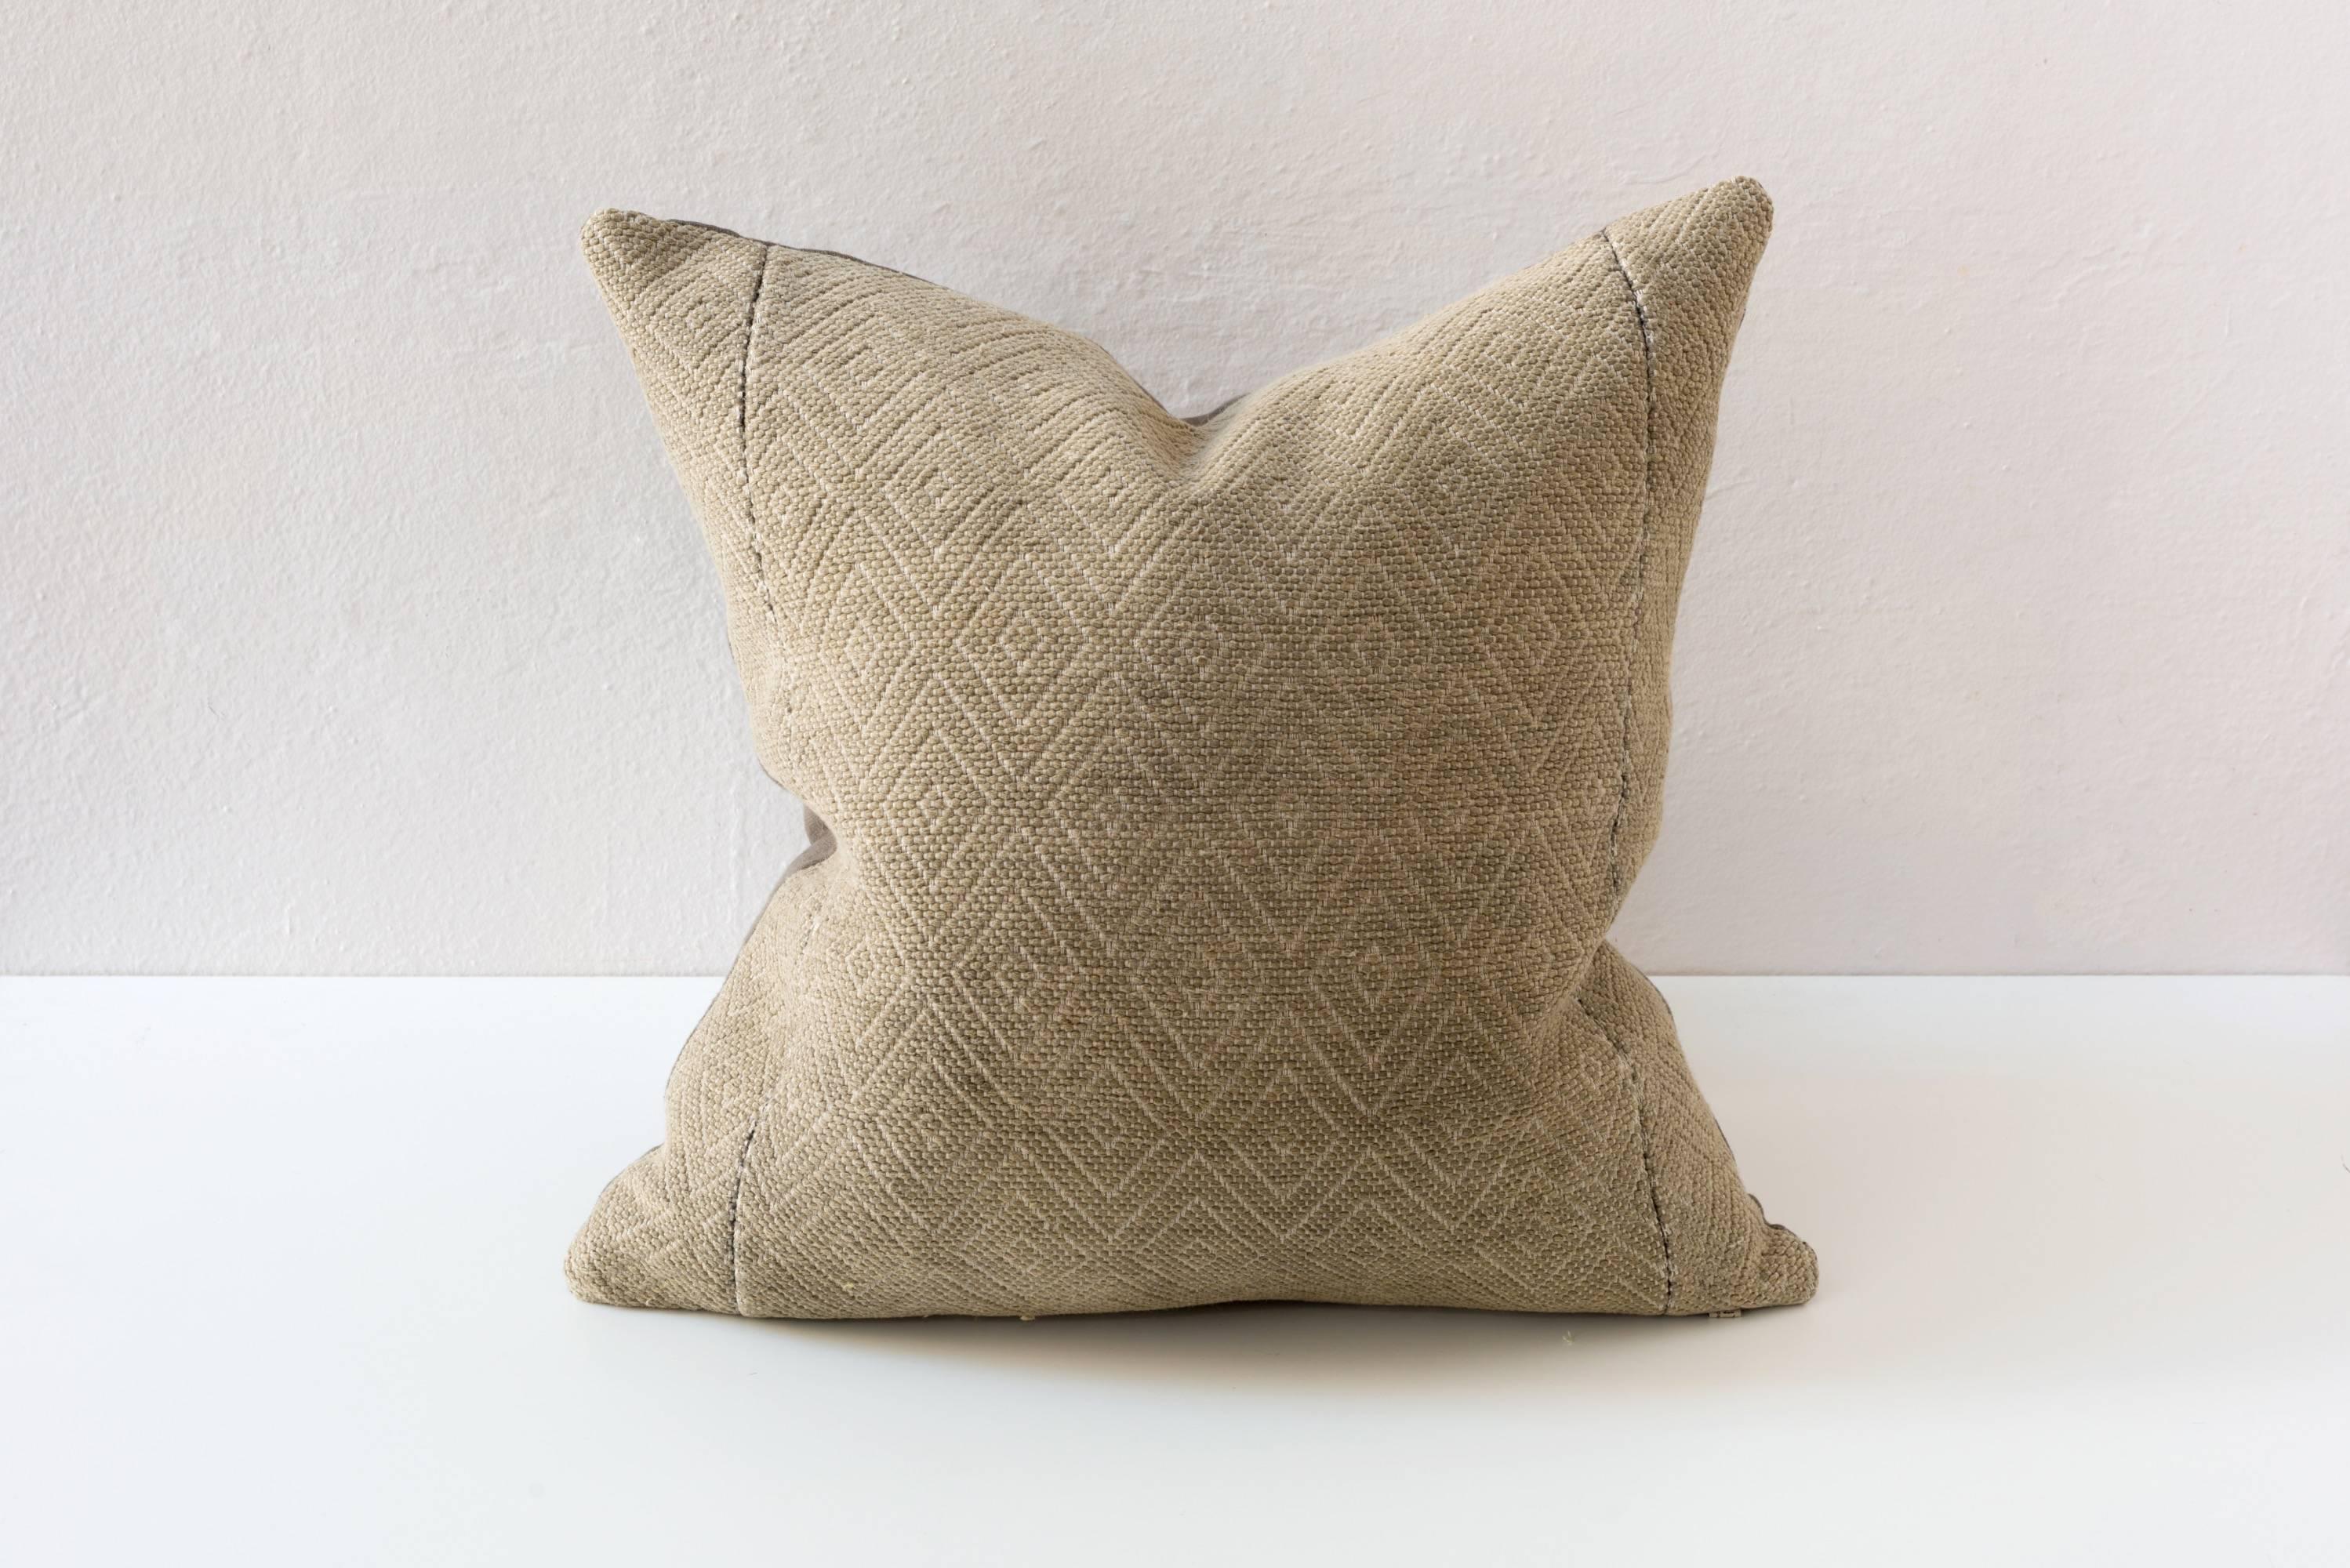 Hand-Woven Vintage Dowry Textile Cushion in a Diamond Pattern, Pale Grey